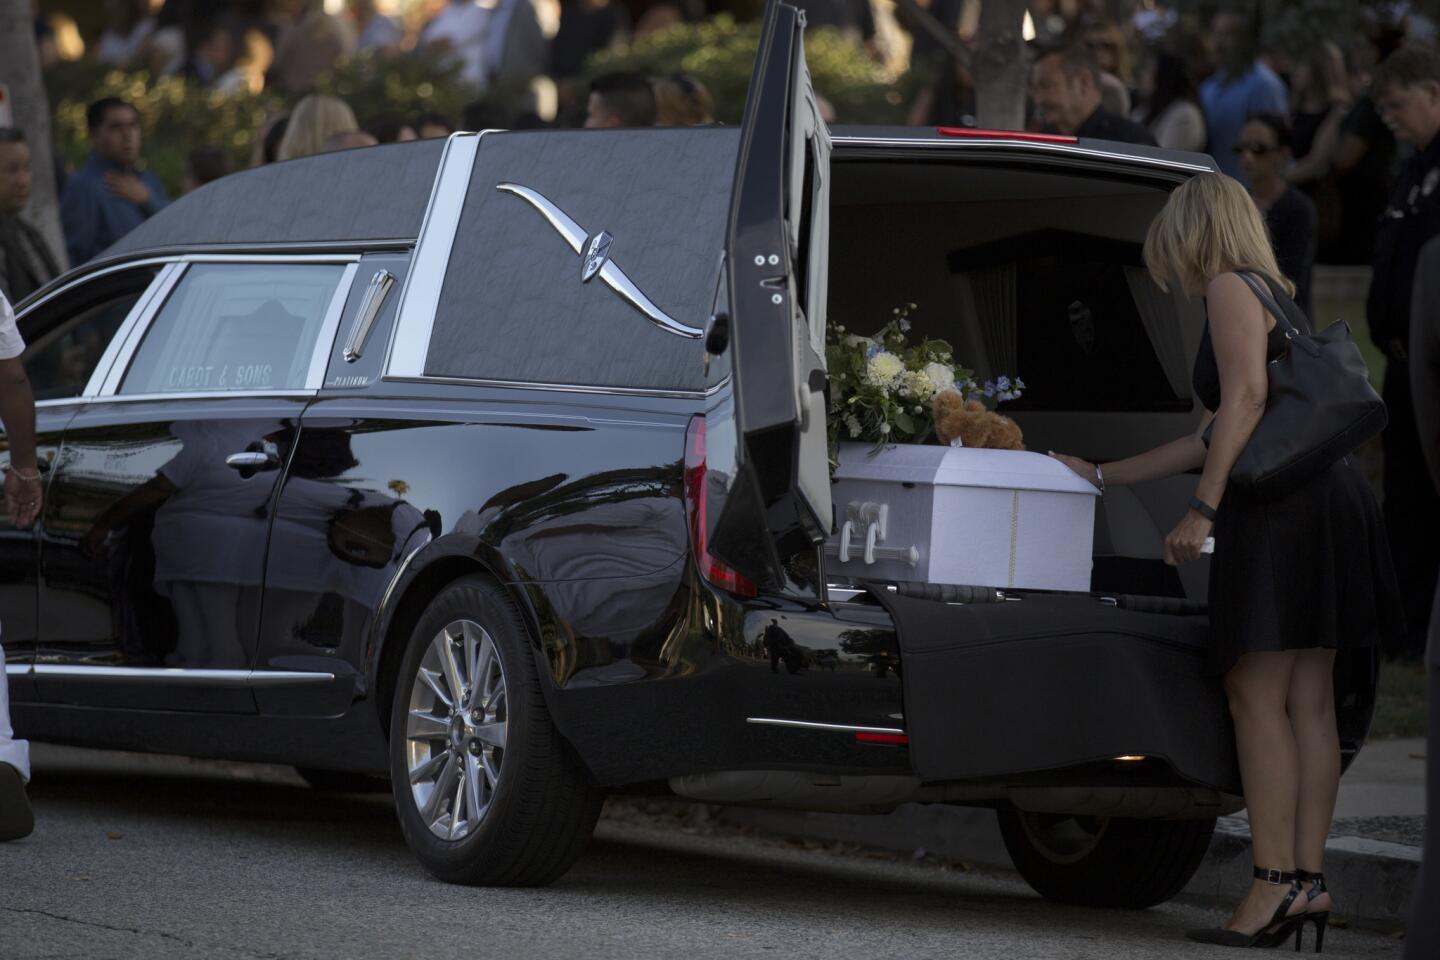 Funeral for 5-year-old